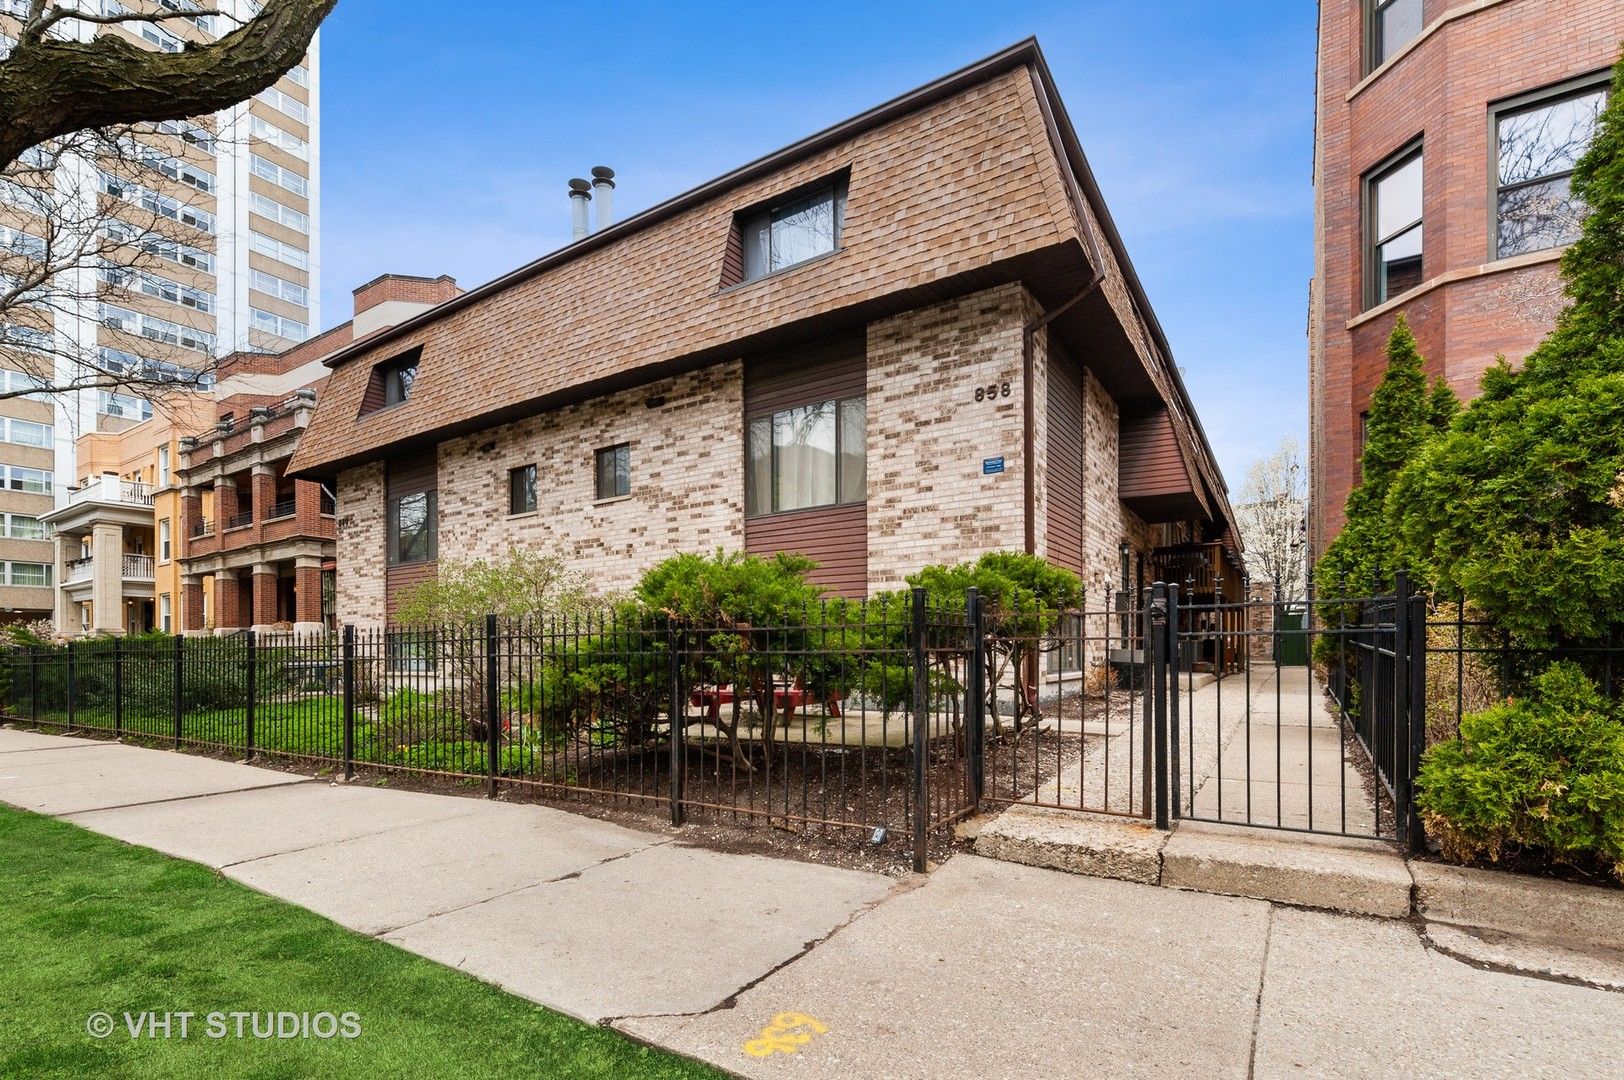 Main Photo: 858 W Lakeside Place Unit D in Chicago: CHI - Uptown Residential for sale ()  : MLS®# 11393978